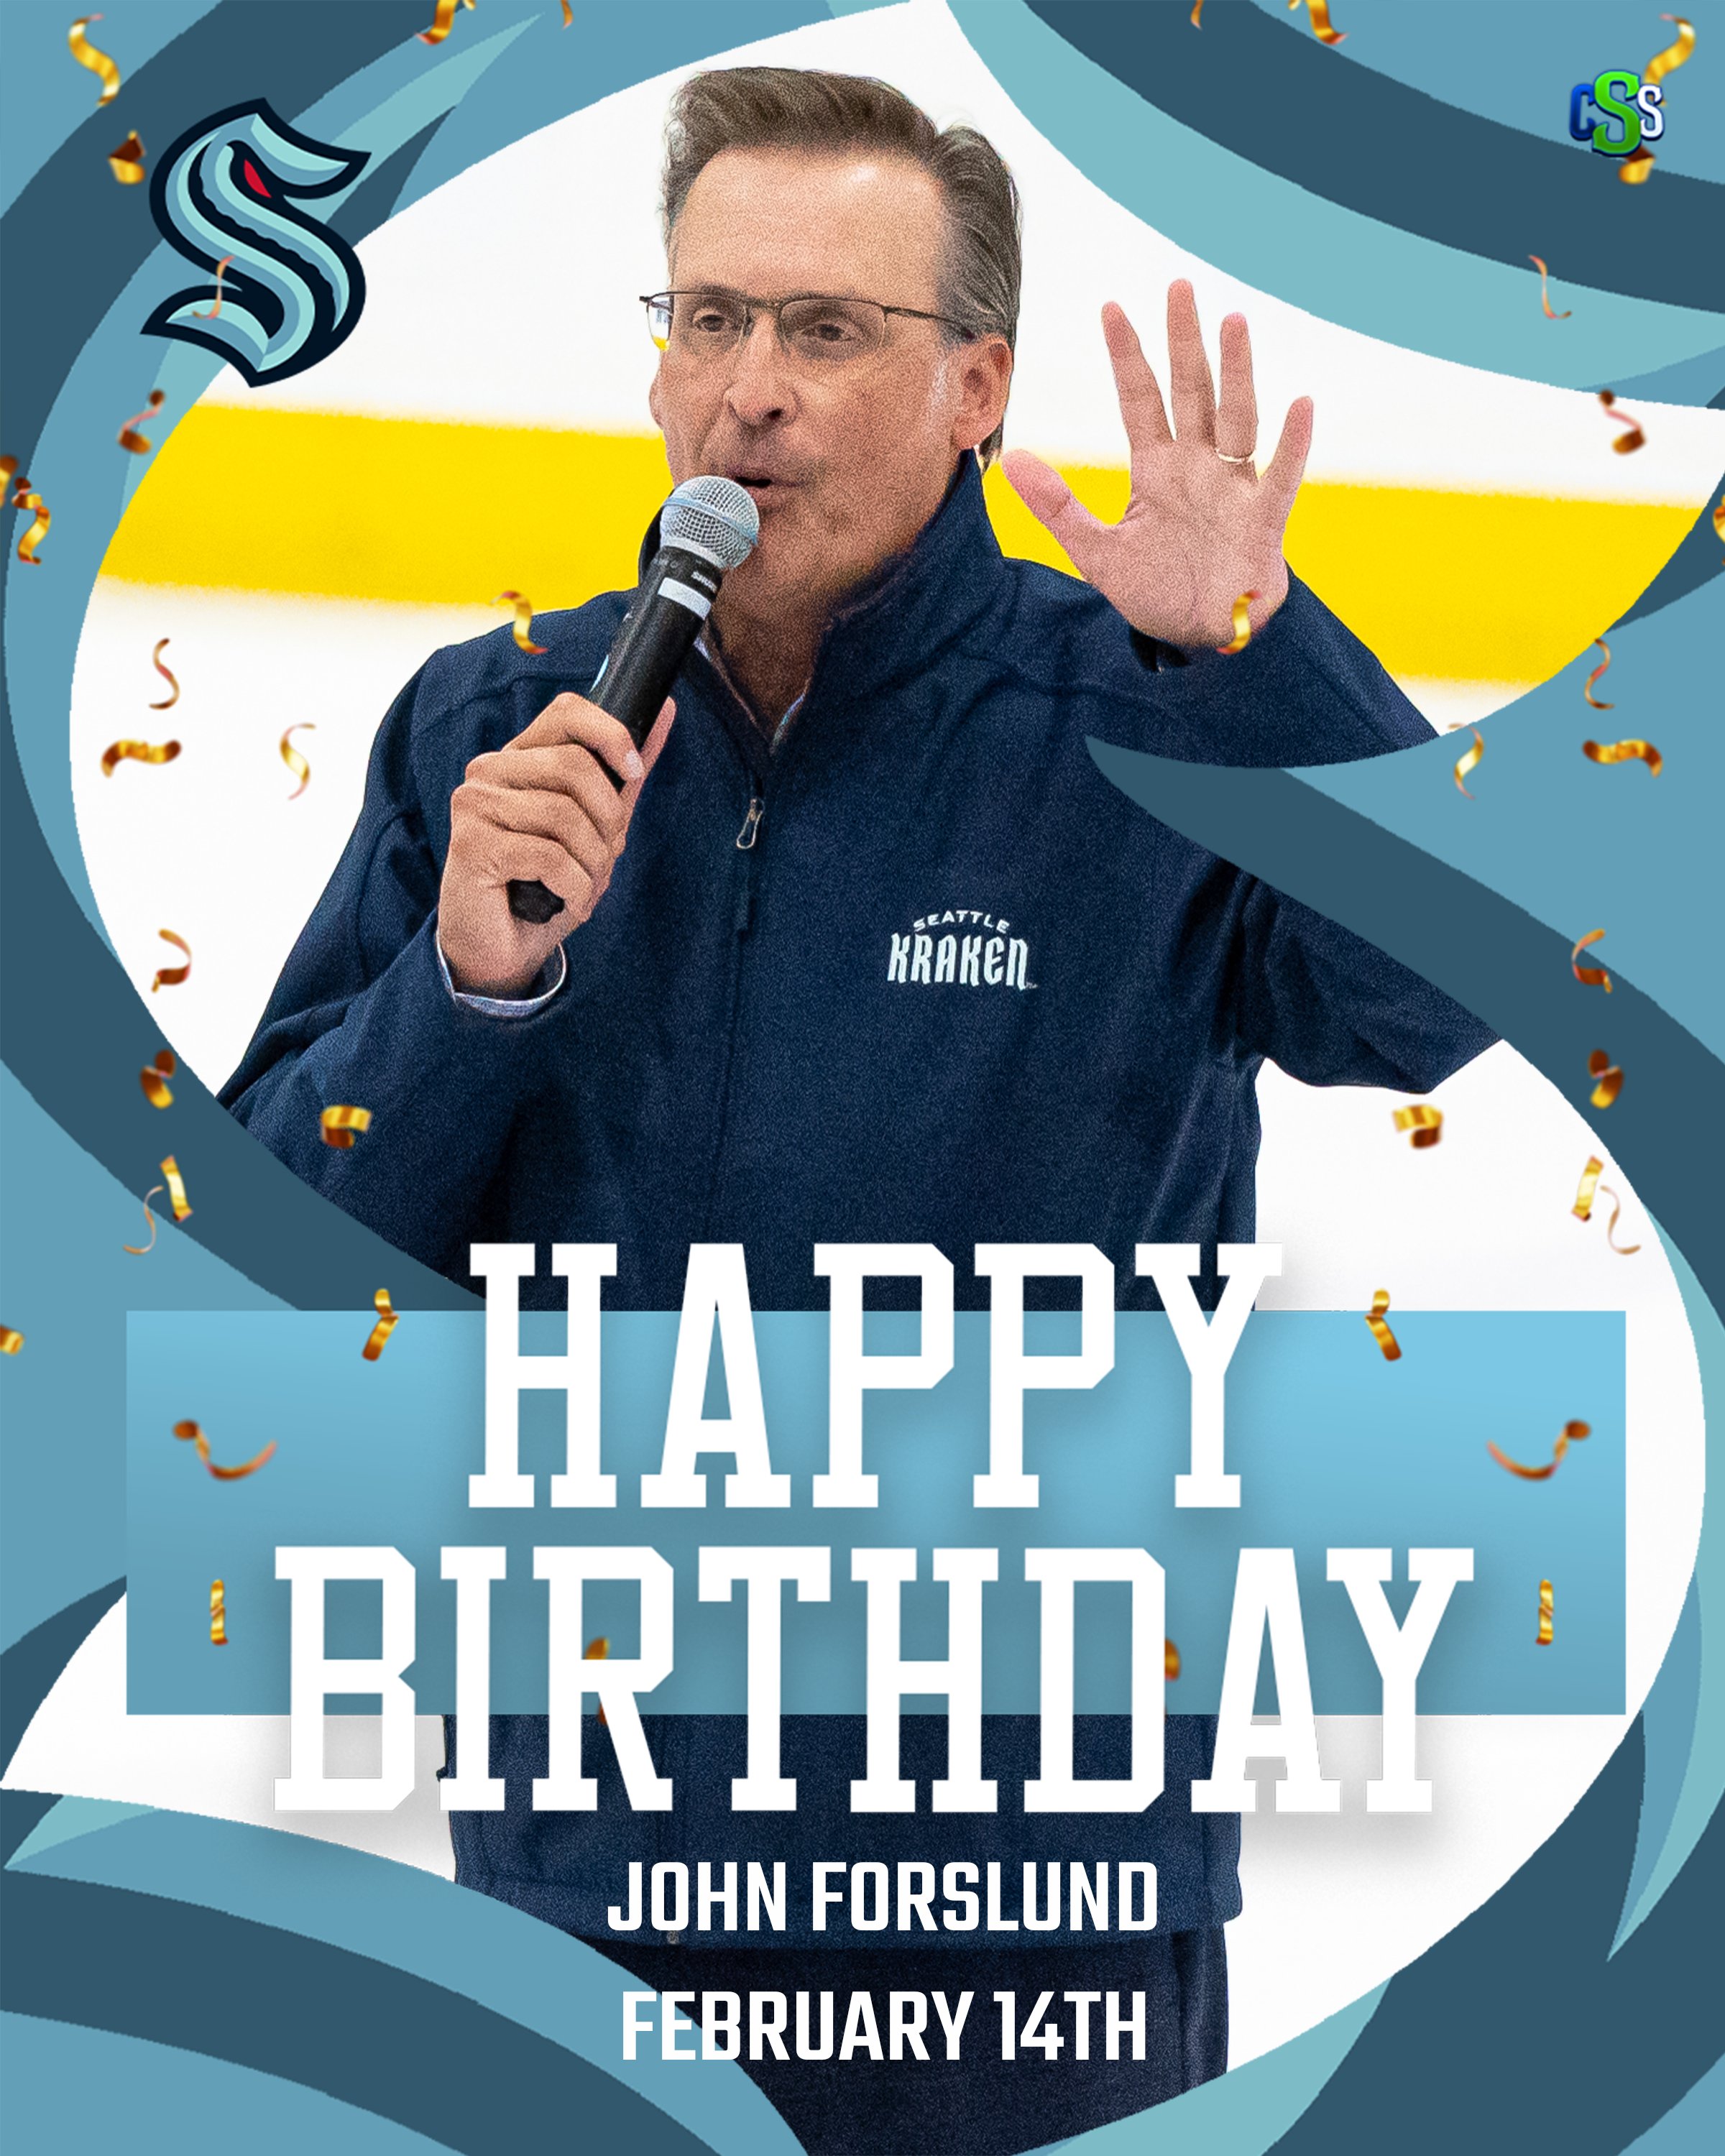 Circling Seattle Sports] Let's all wish a very HAPPY BIRTHDAY to